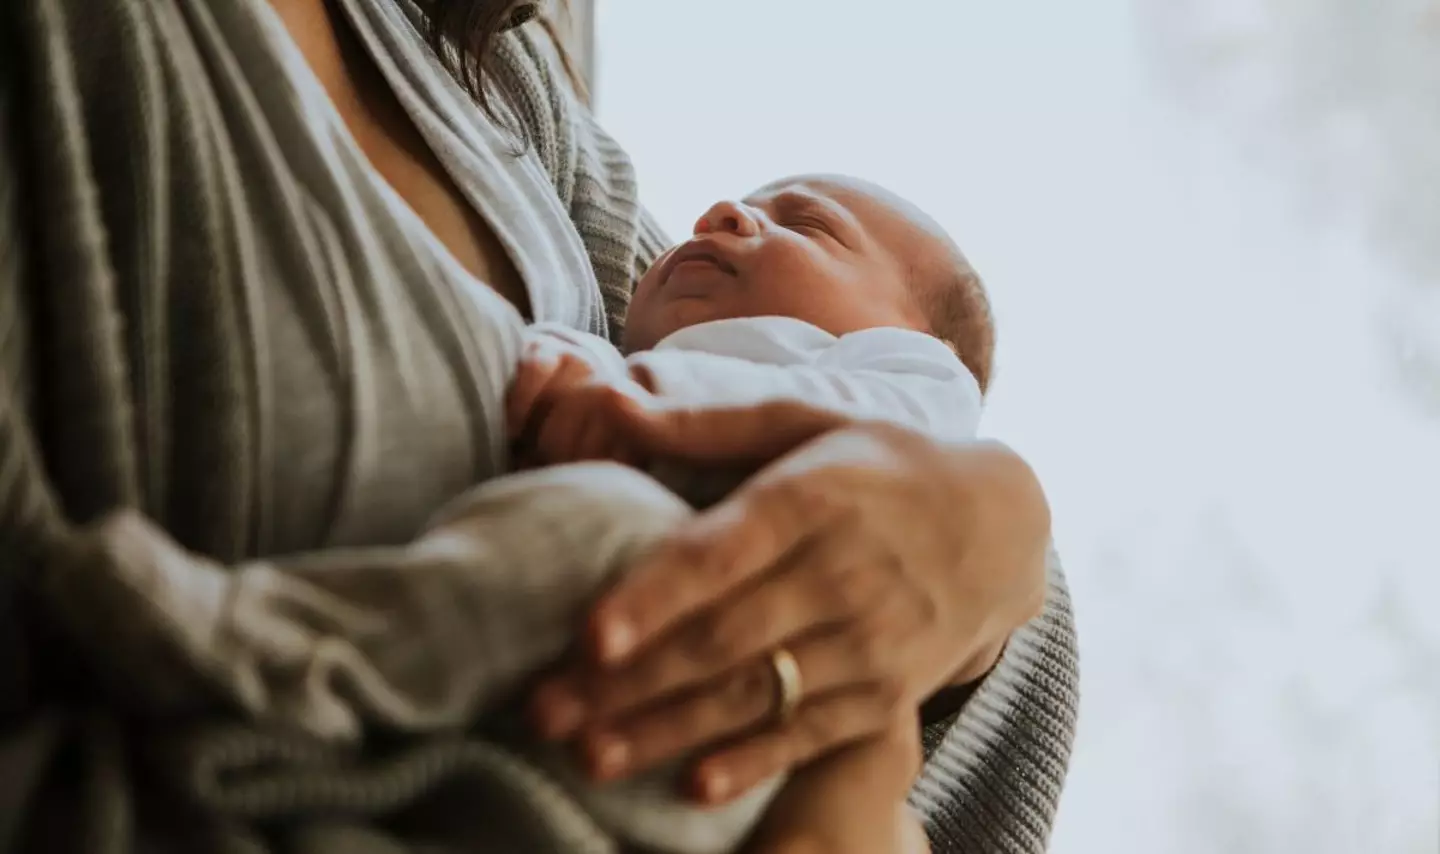 The influencer names her baby Theresa Havens Stickle. (Rawpixel/Getty Images)